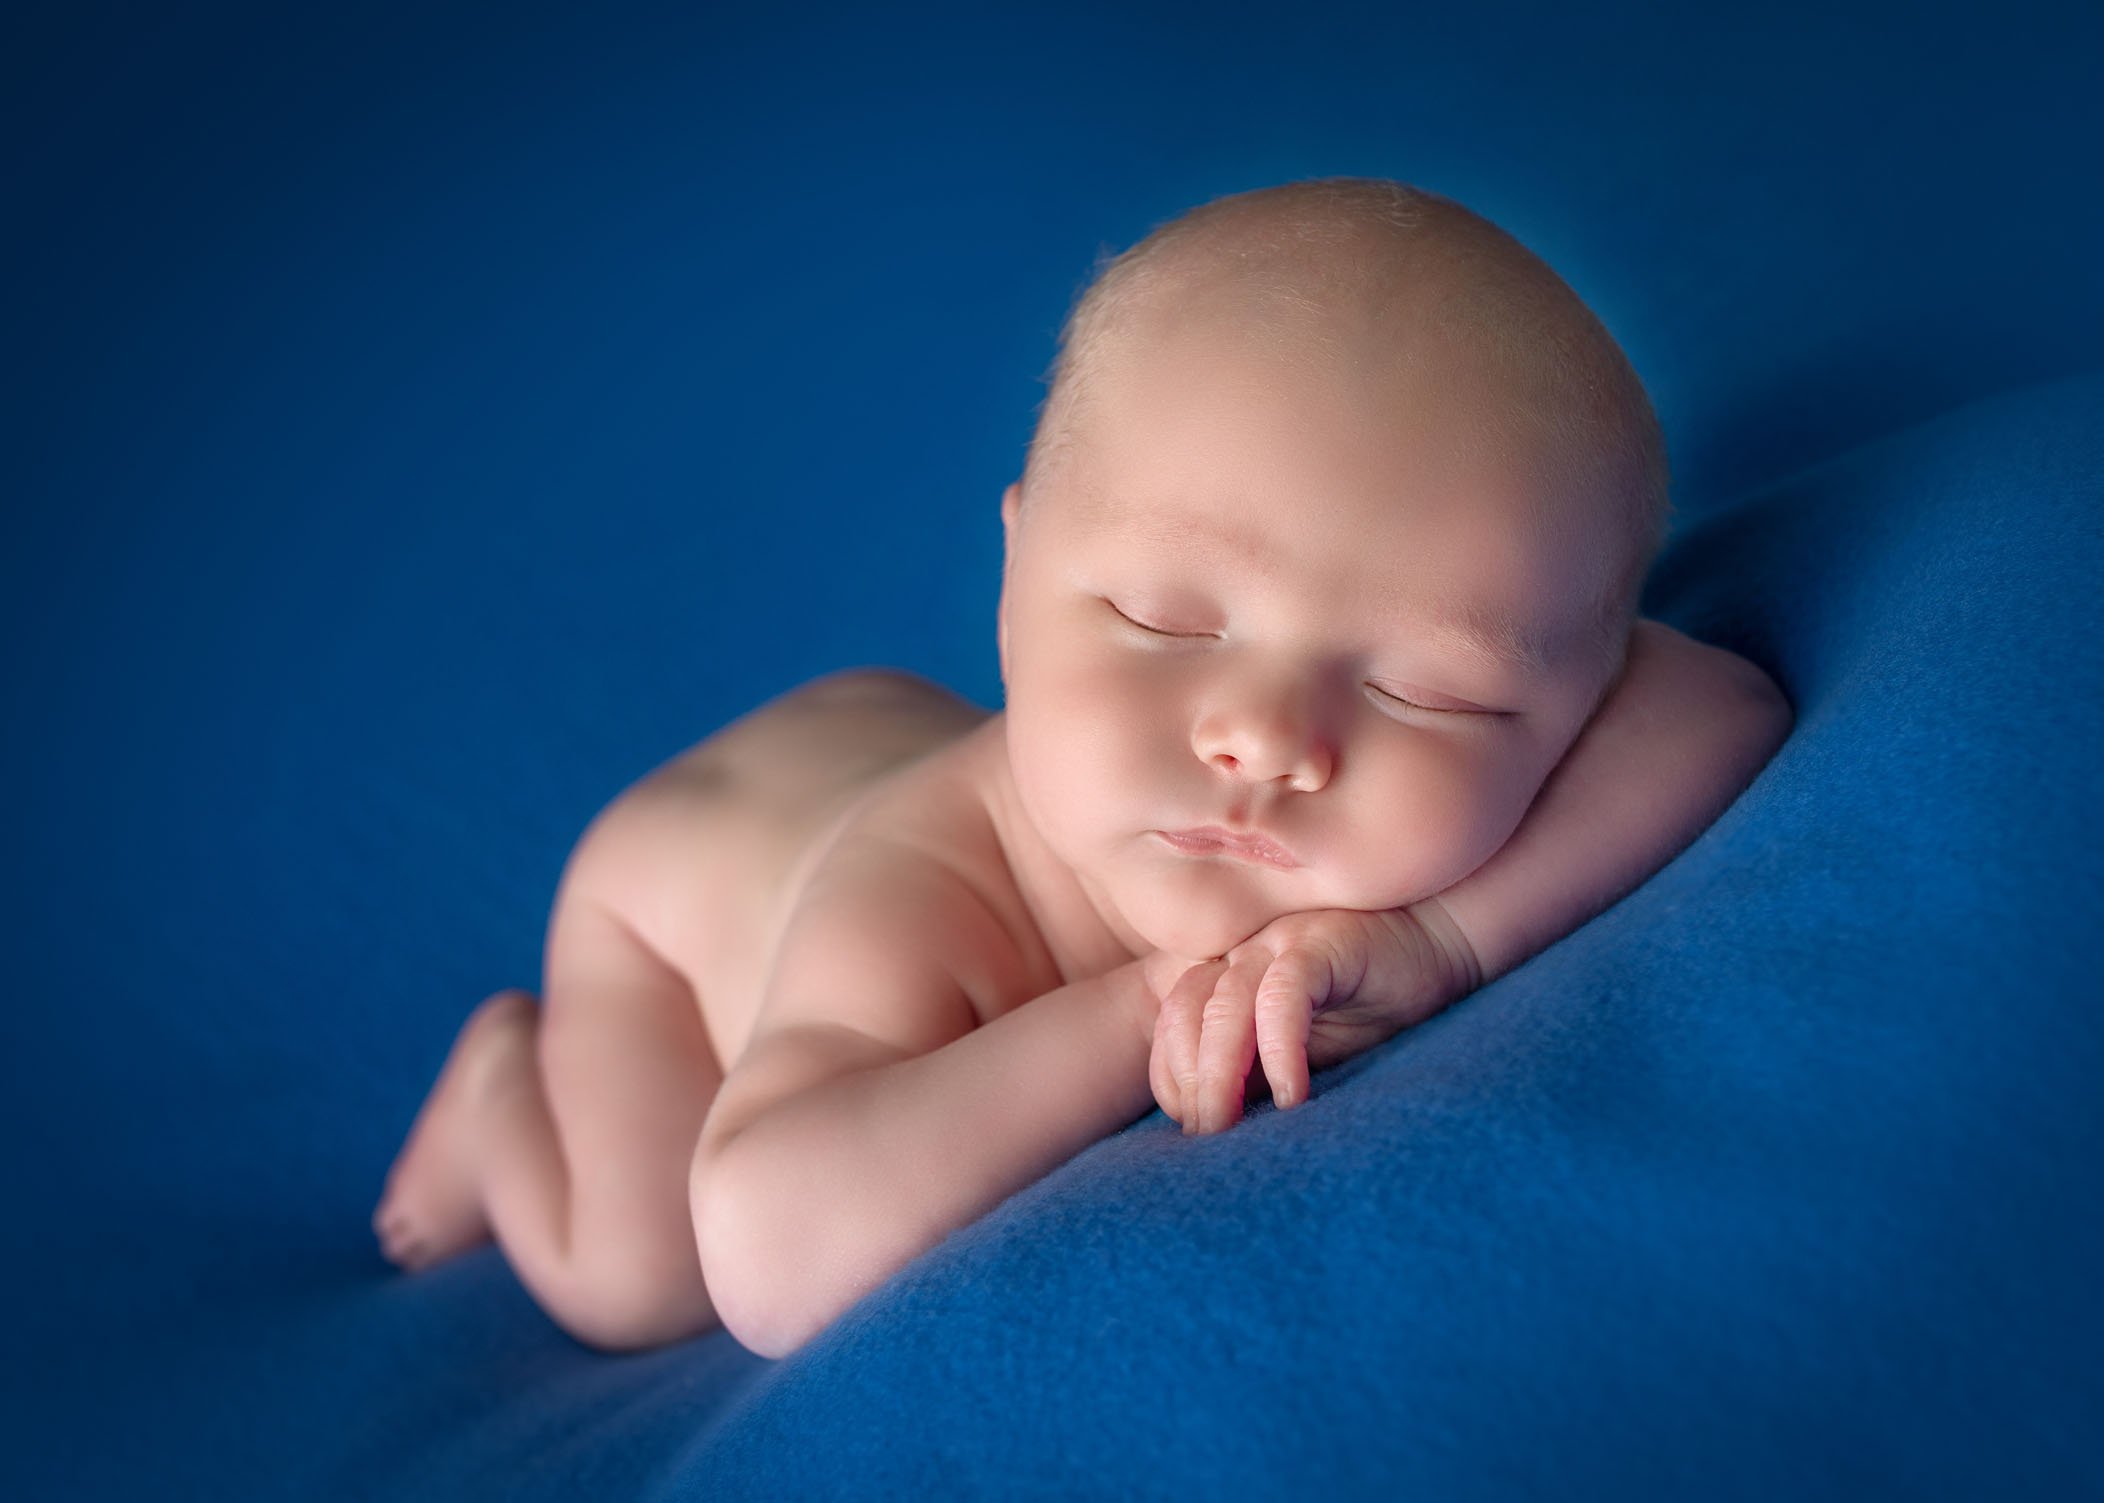 newborn boy sleeping on his tummy with head resting on his arms on blue background